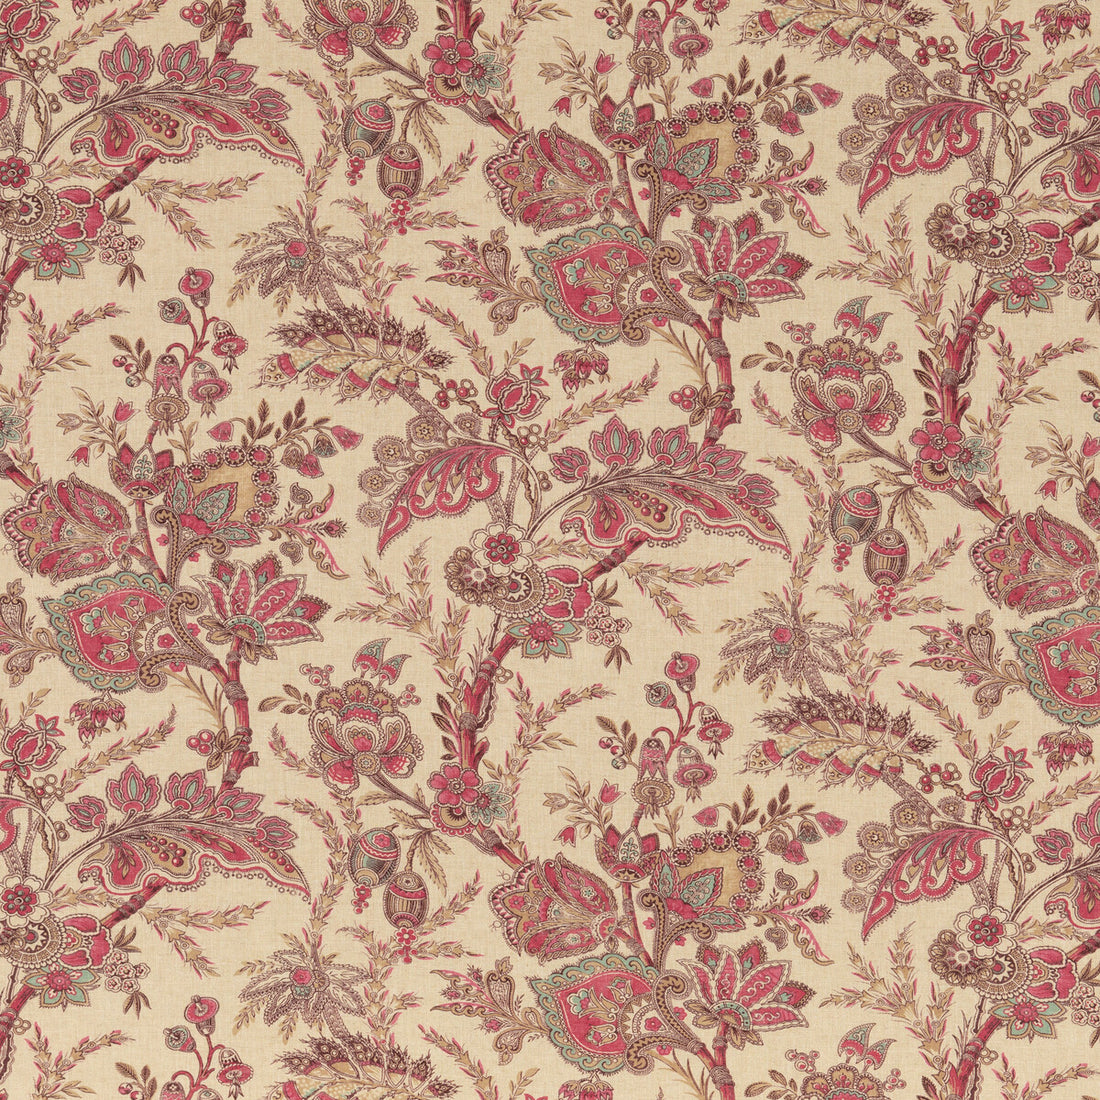 Jewel Indienne fabric in red/blue color - pattern BP10830.1.0 - by G P &amp; J Baker in the Coromandel collection